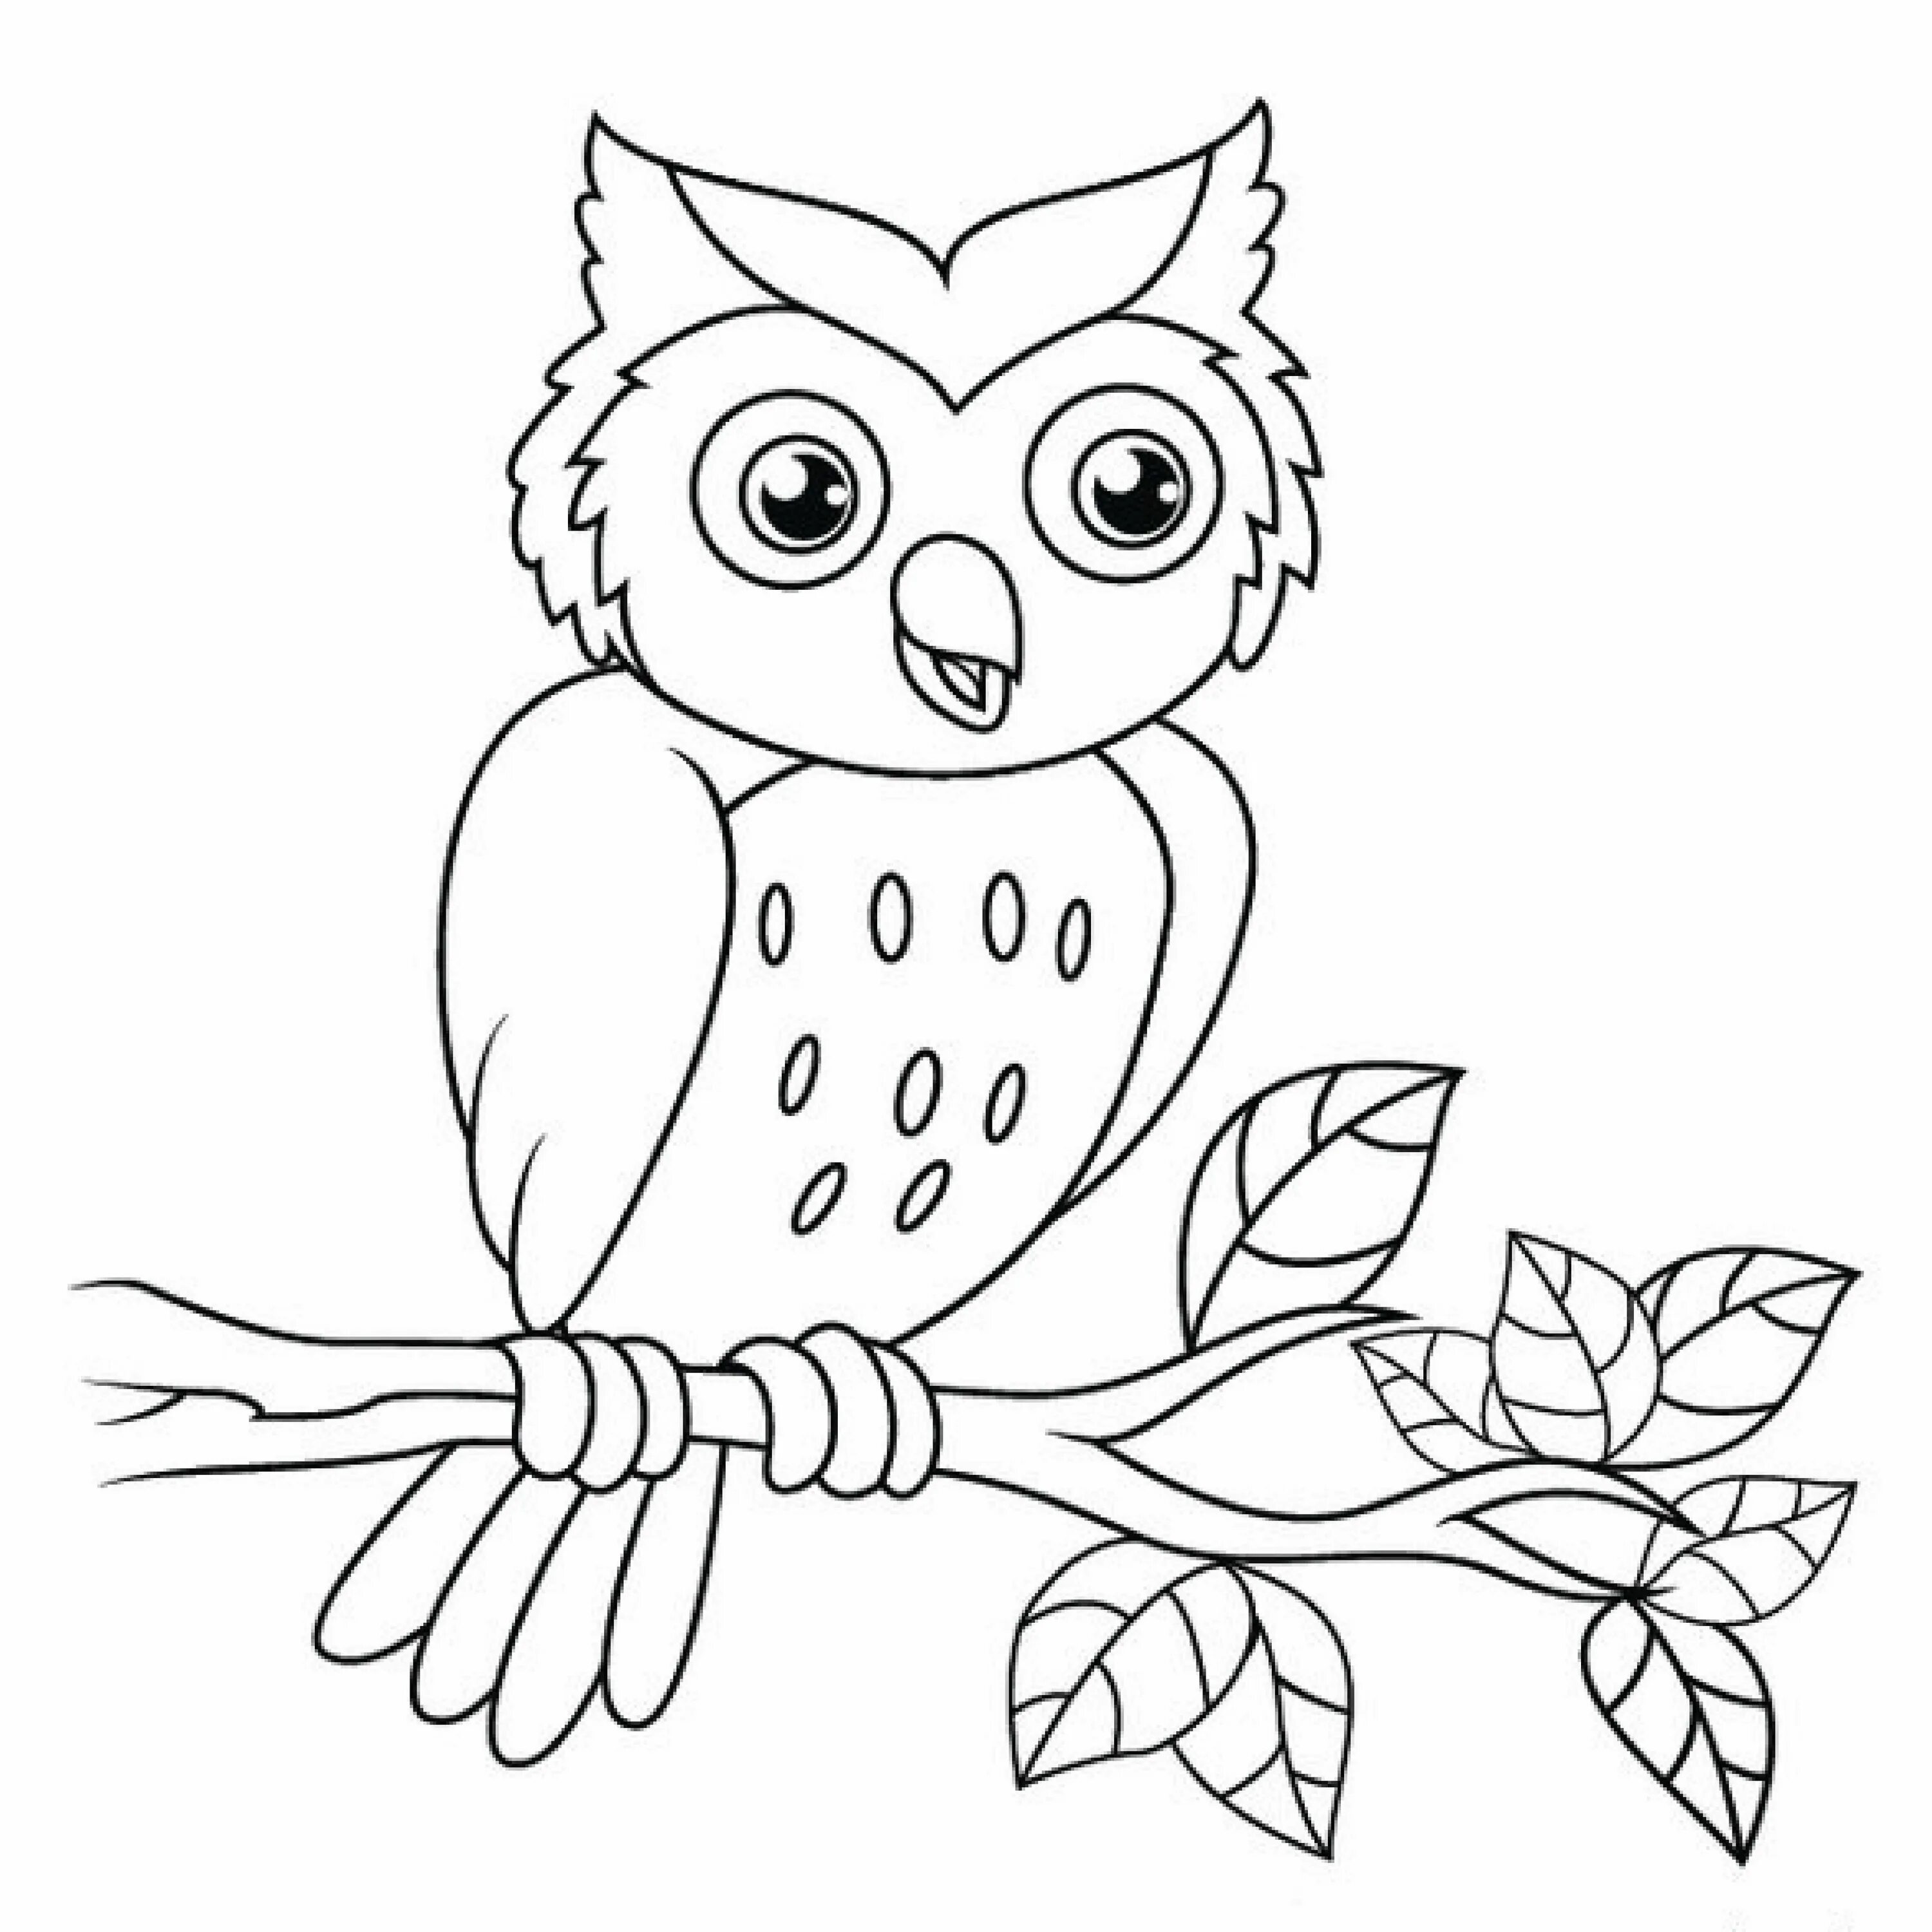 Bianca owl mystical coloring page